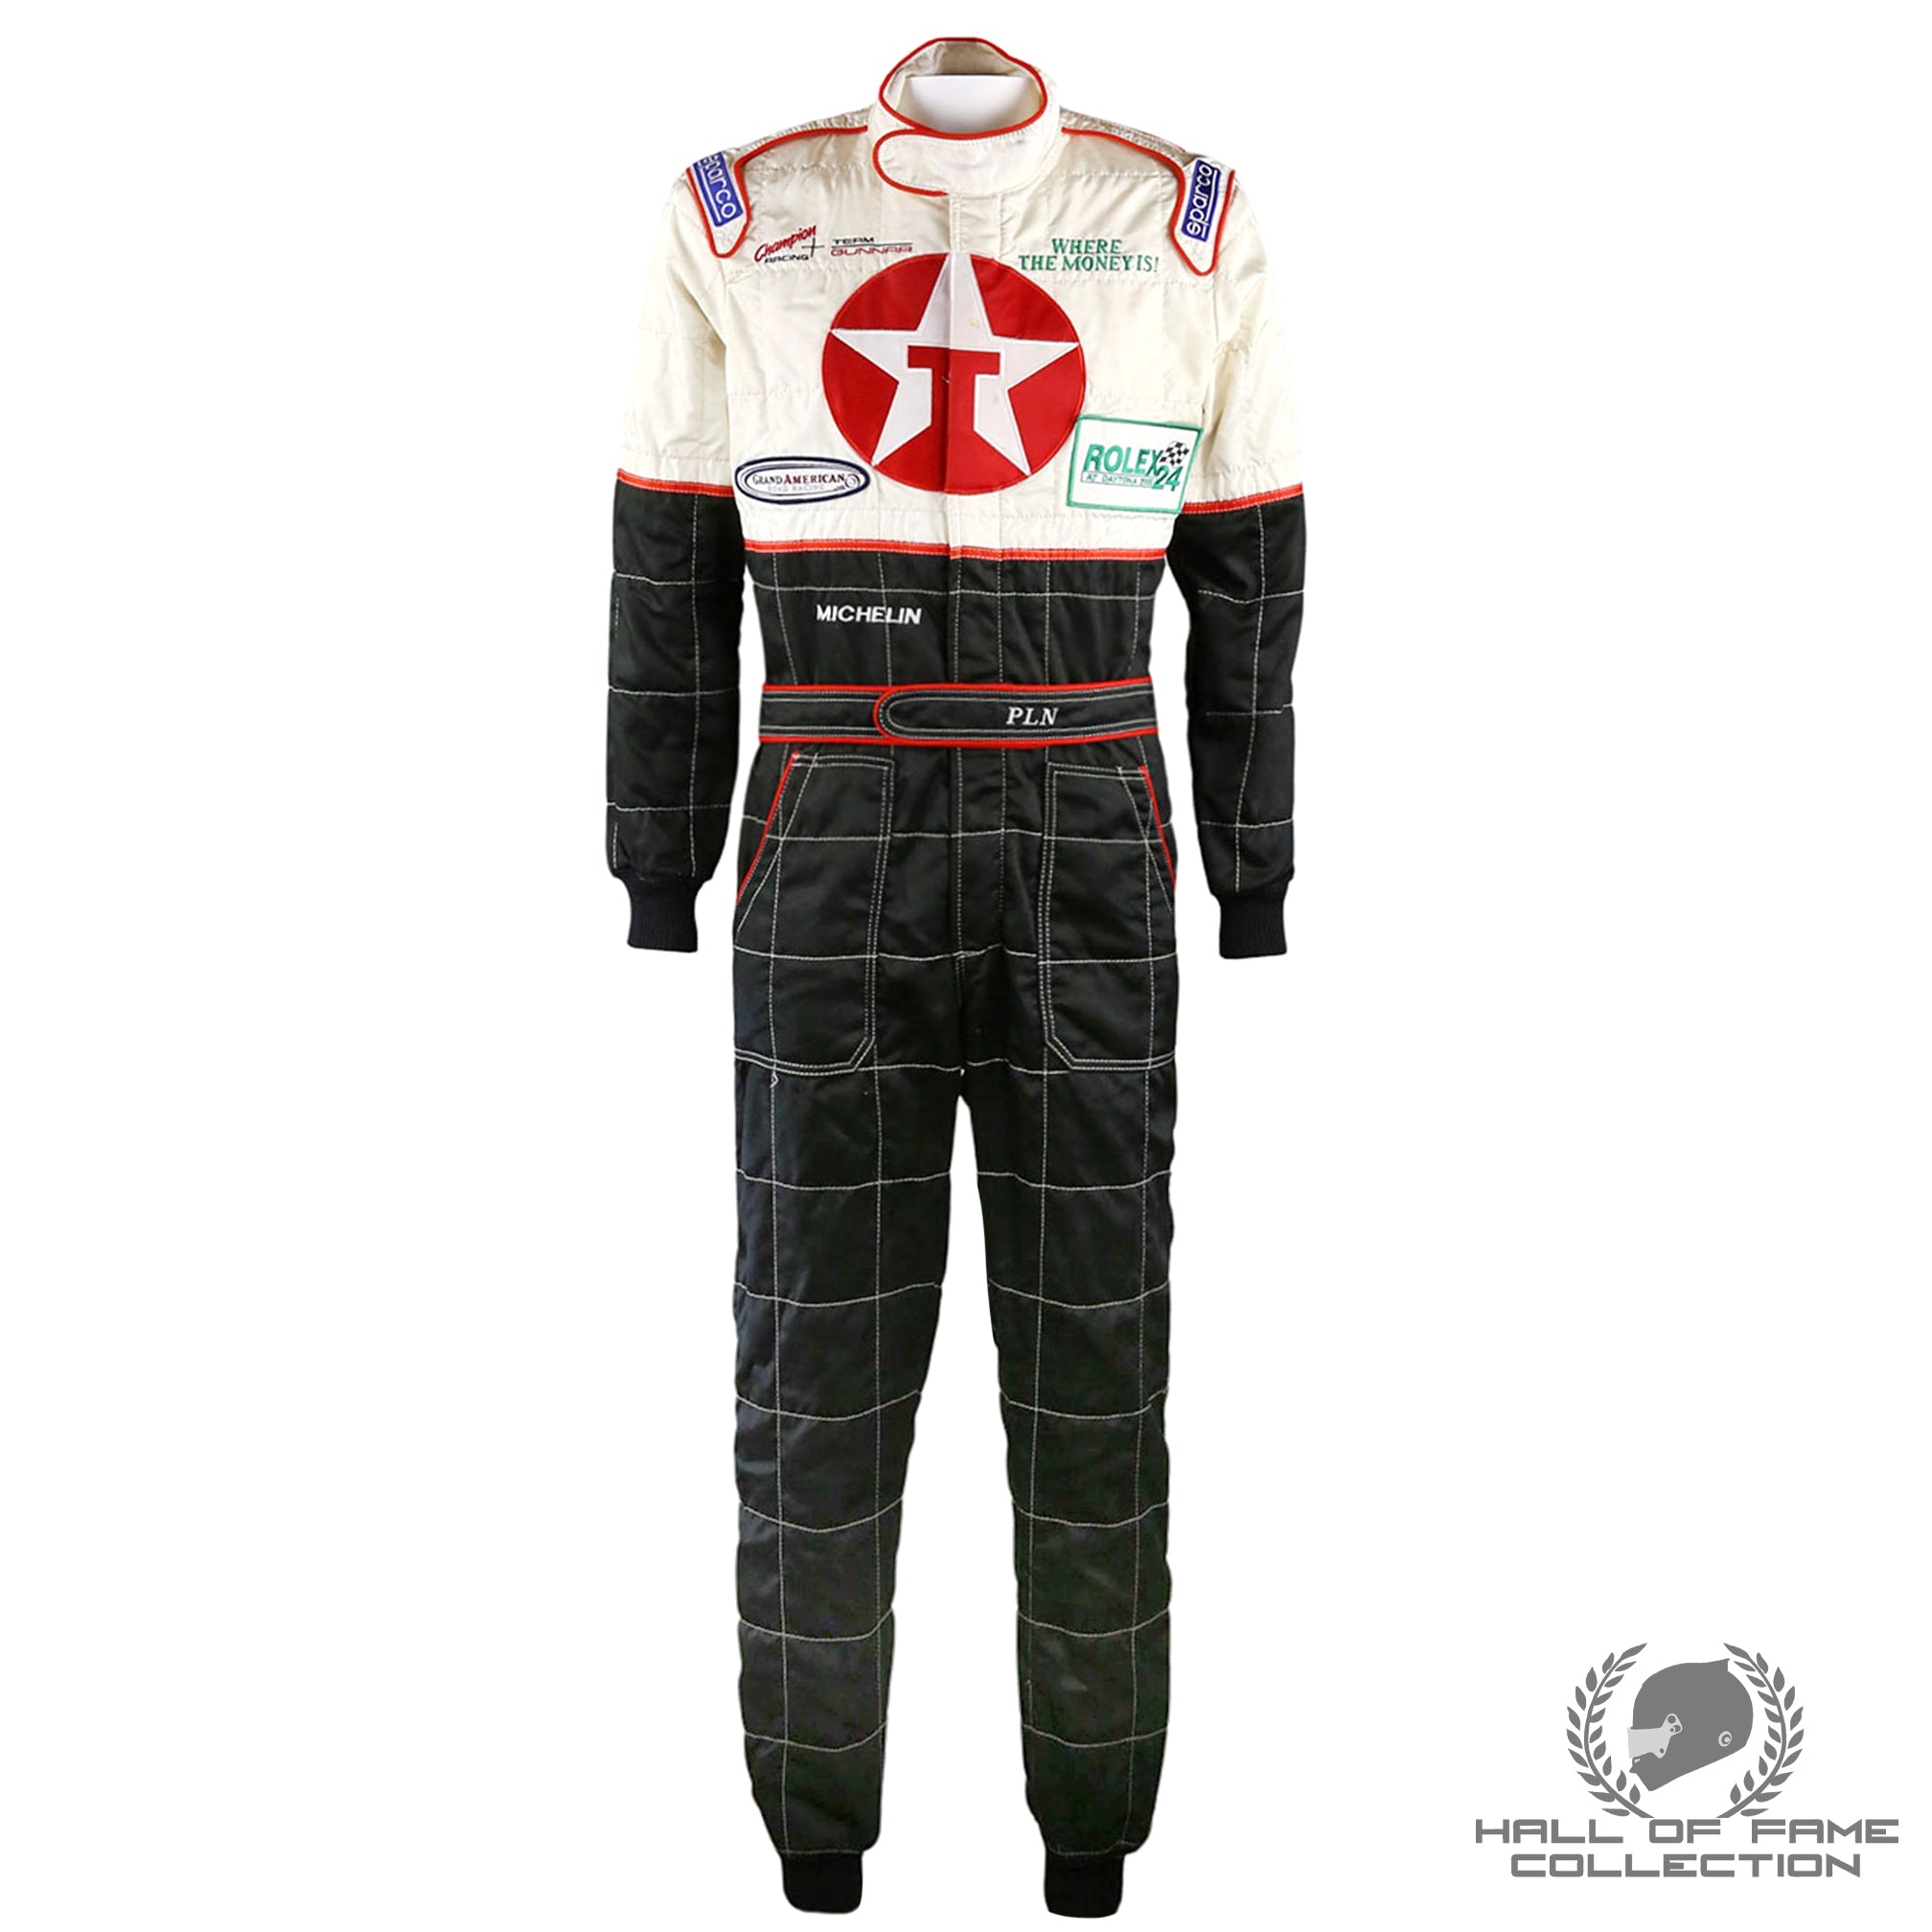 2000 Paul Newman Signed Race Used Champion Racing 24 Hours of Daytona Sports Car Suit